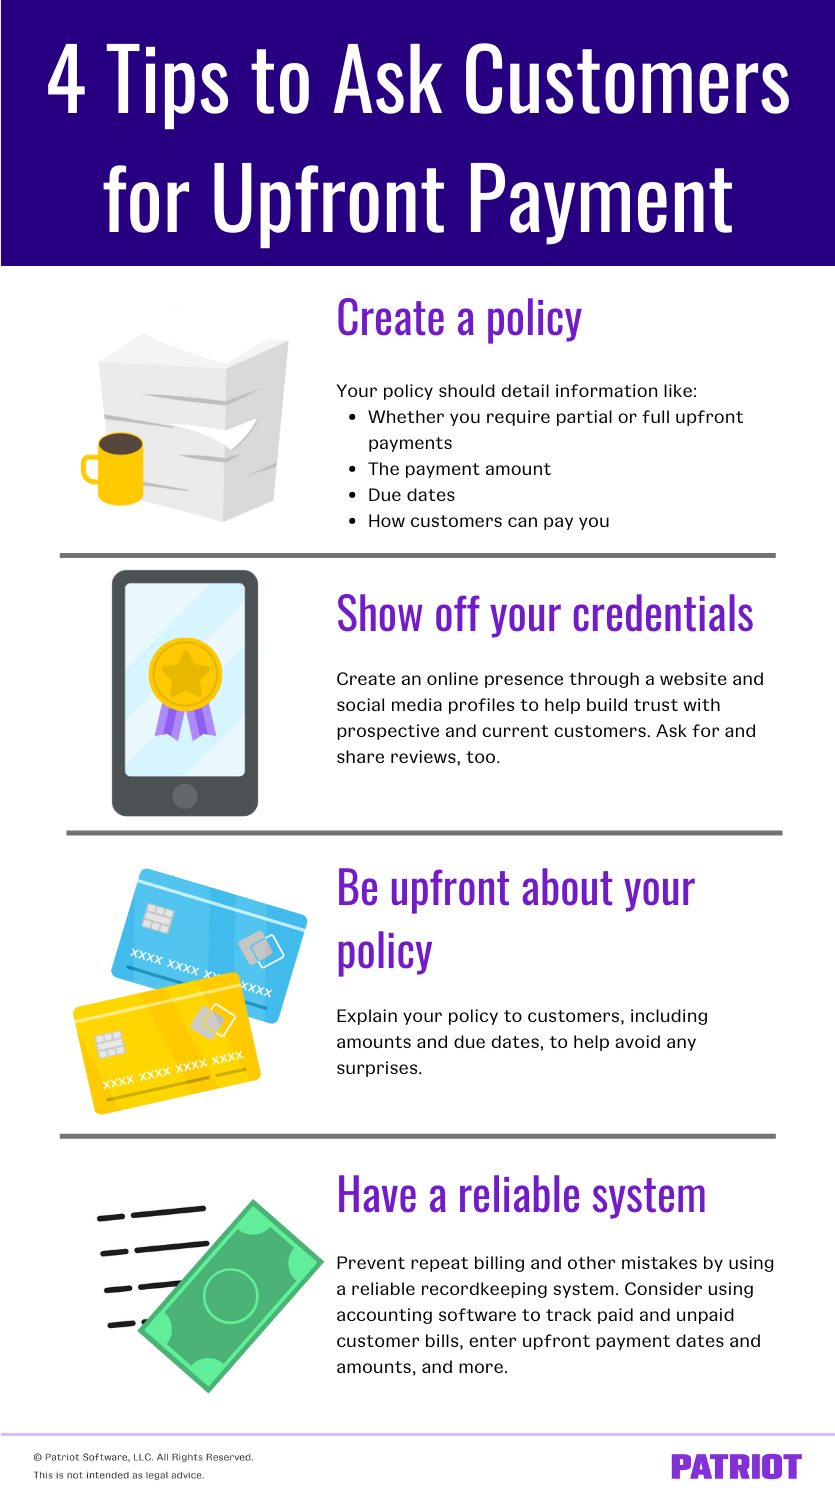 4 tips to ask customers for upfront payment: 1) create a policy 2) show off your credentials 3) be upfront about your policy 4) have a reliable system